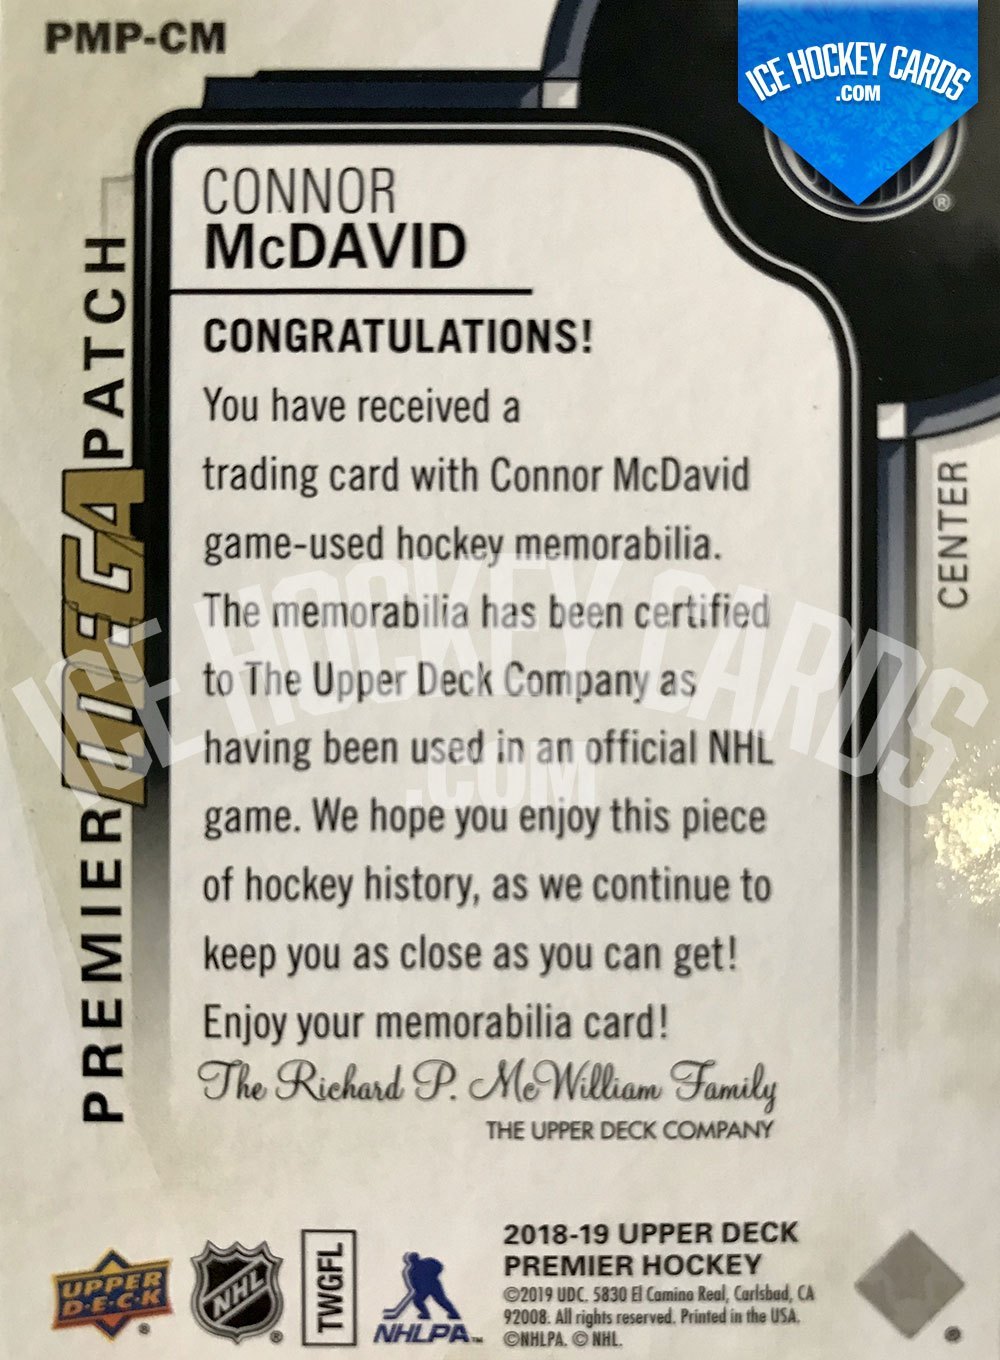 Upper Deck - Premier Hockey 2018-19 - Connor McDavid Authentic Game-Used Premier Mega Patch Card up to 22 prints back RARE